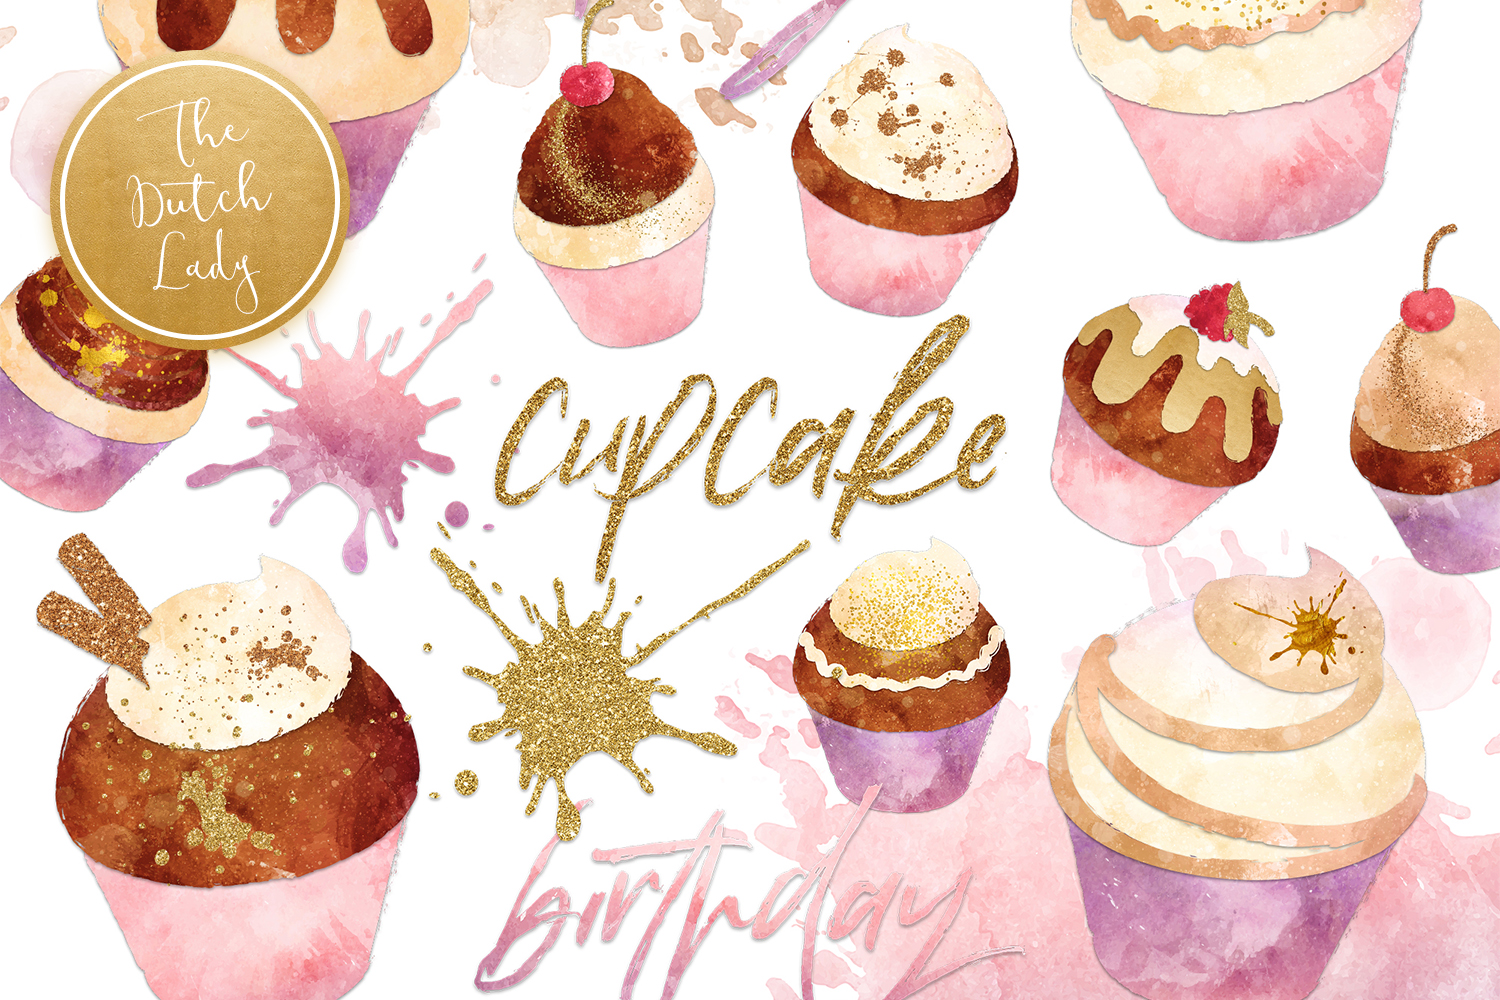 cupcake clipart lady